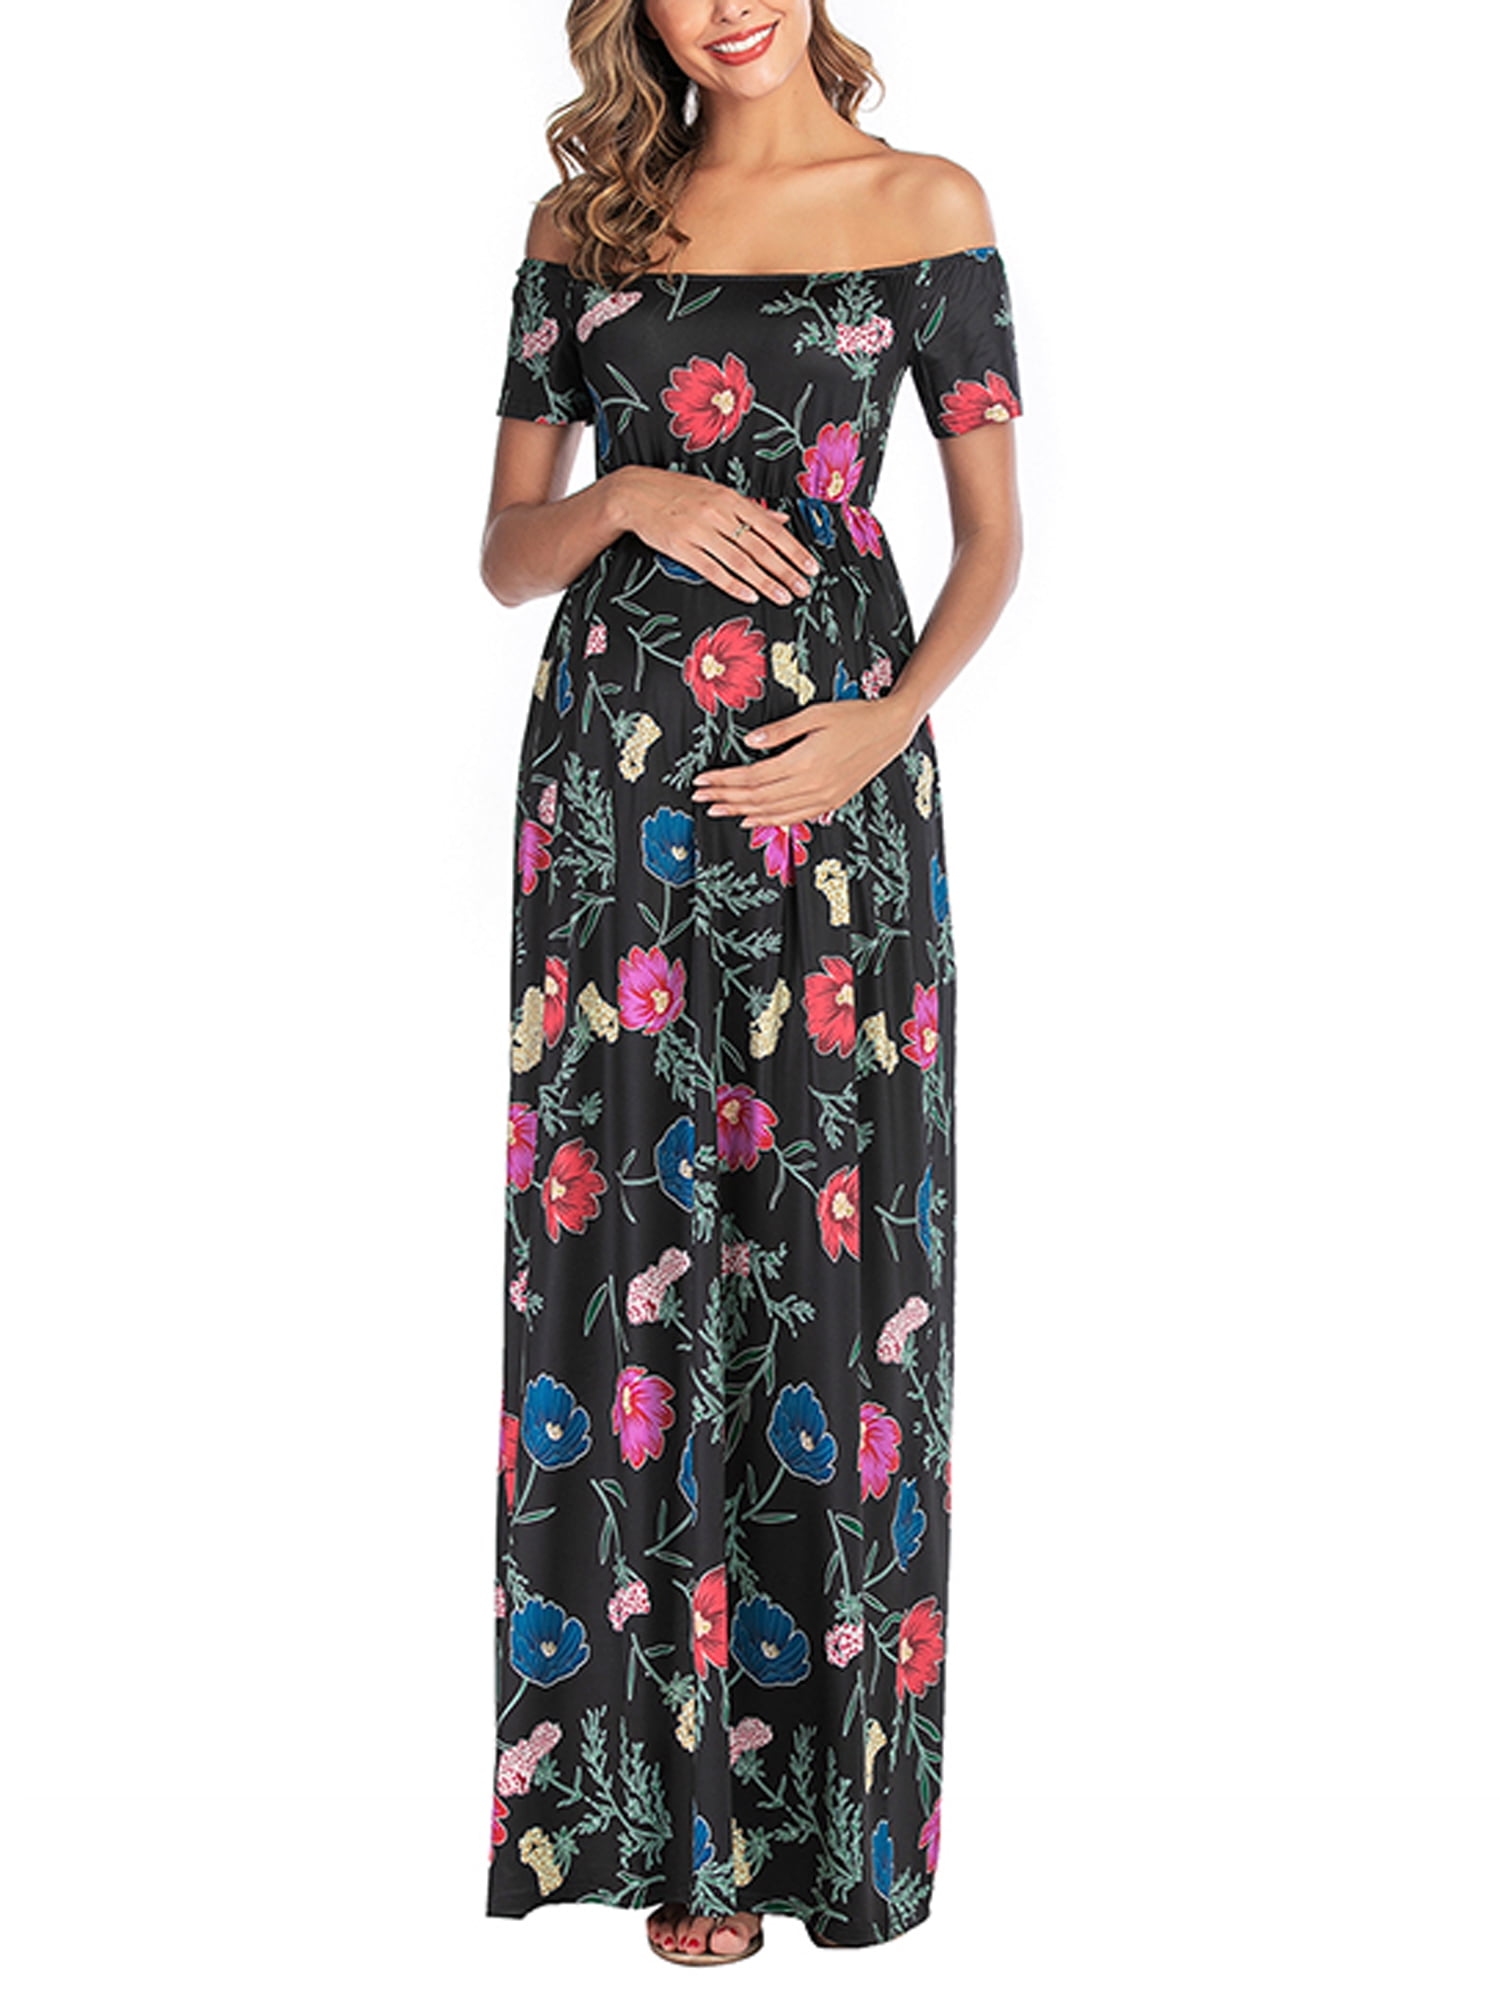 Womens Maternity Ruffle Off-Shoulder Floral Print Dress Pregnancy Casual Clothes 